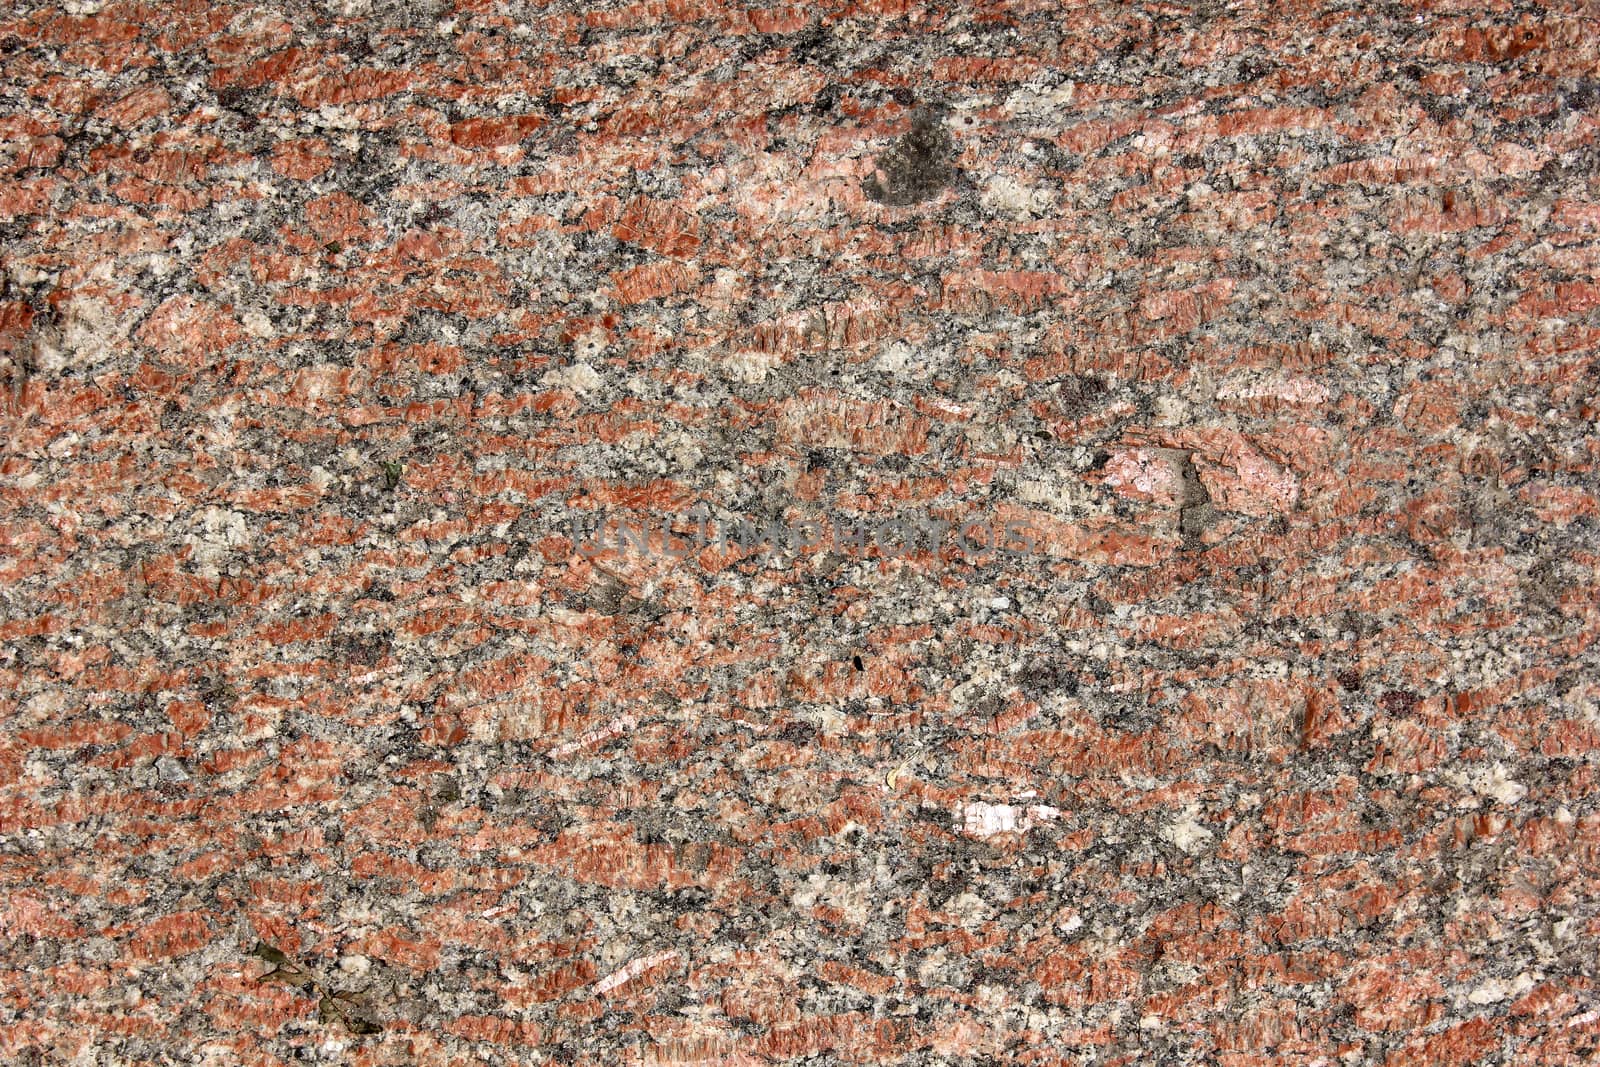 Monolith surface from the pink natural processed granite